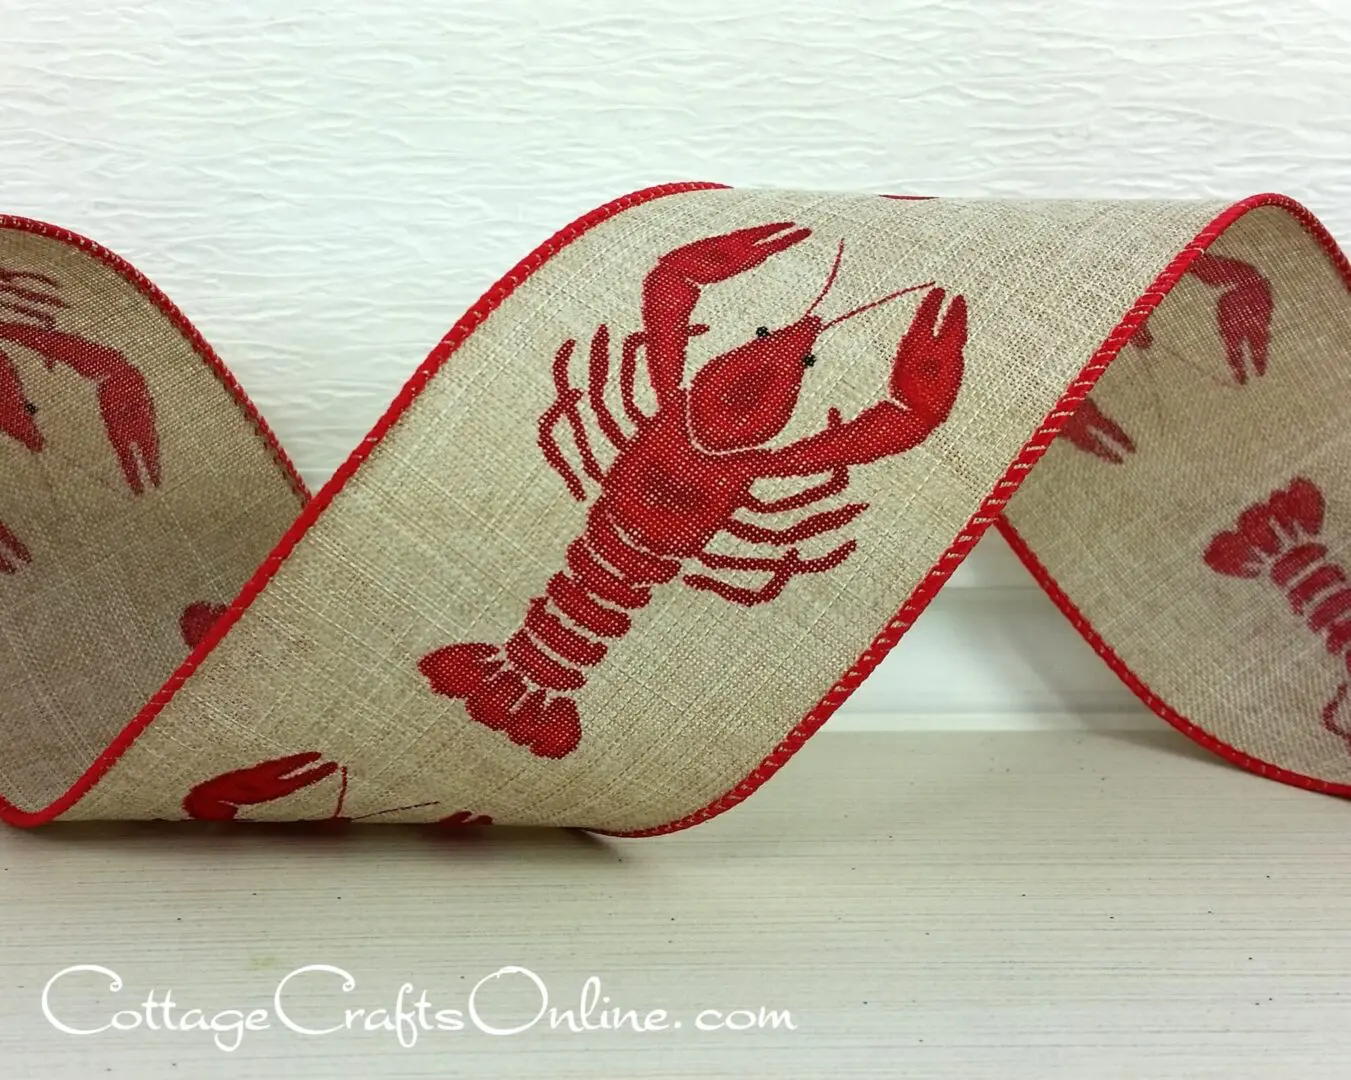 A close up of the lobster ribbon